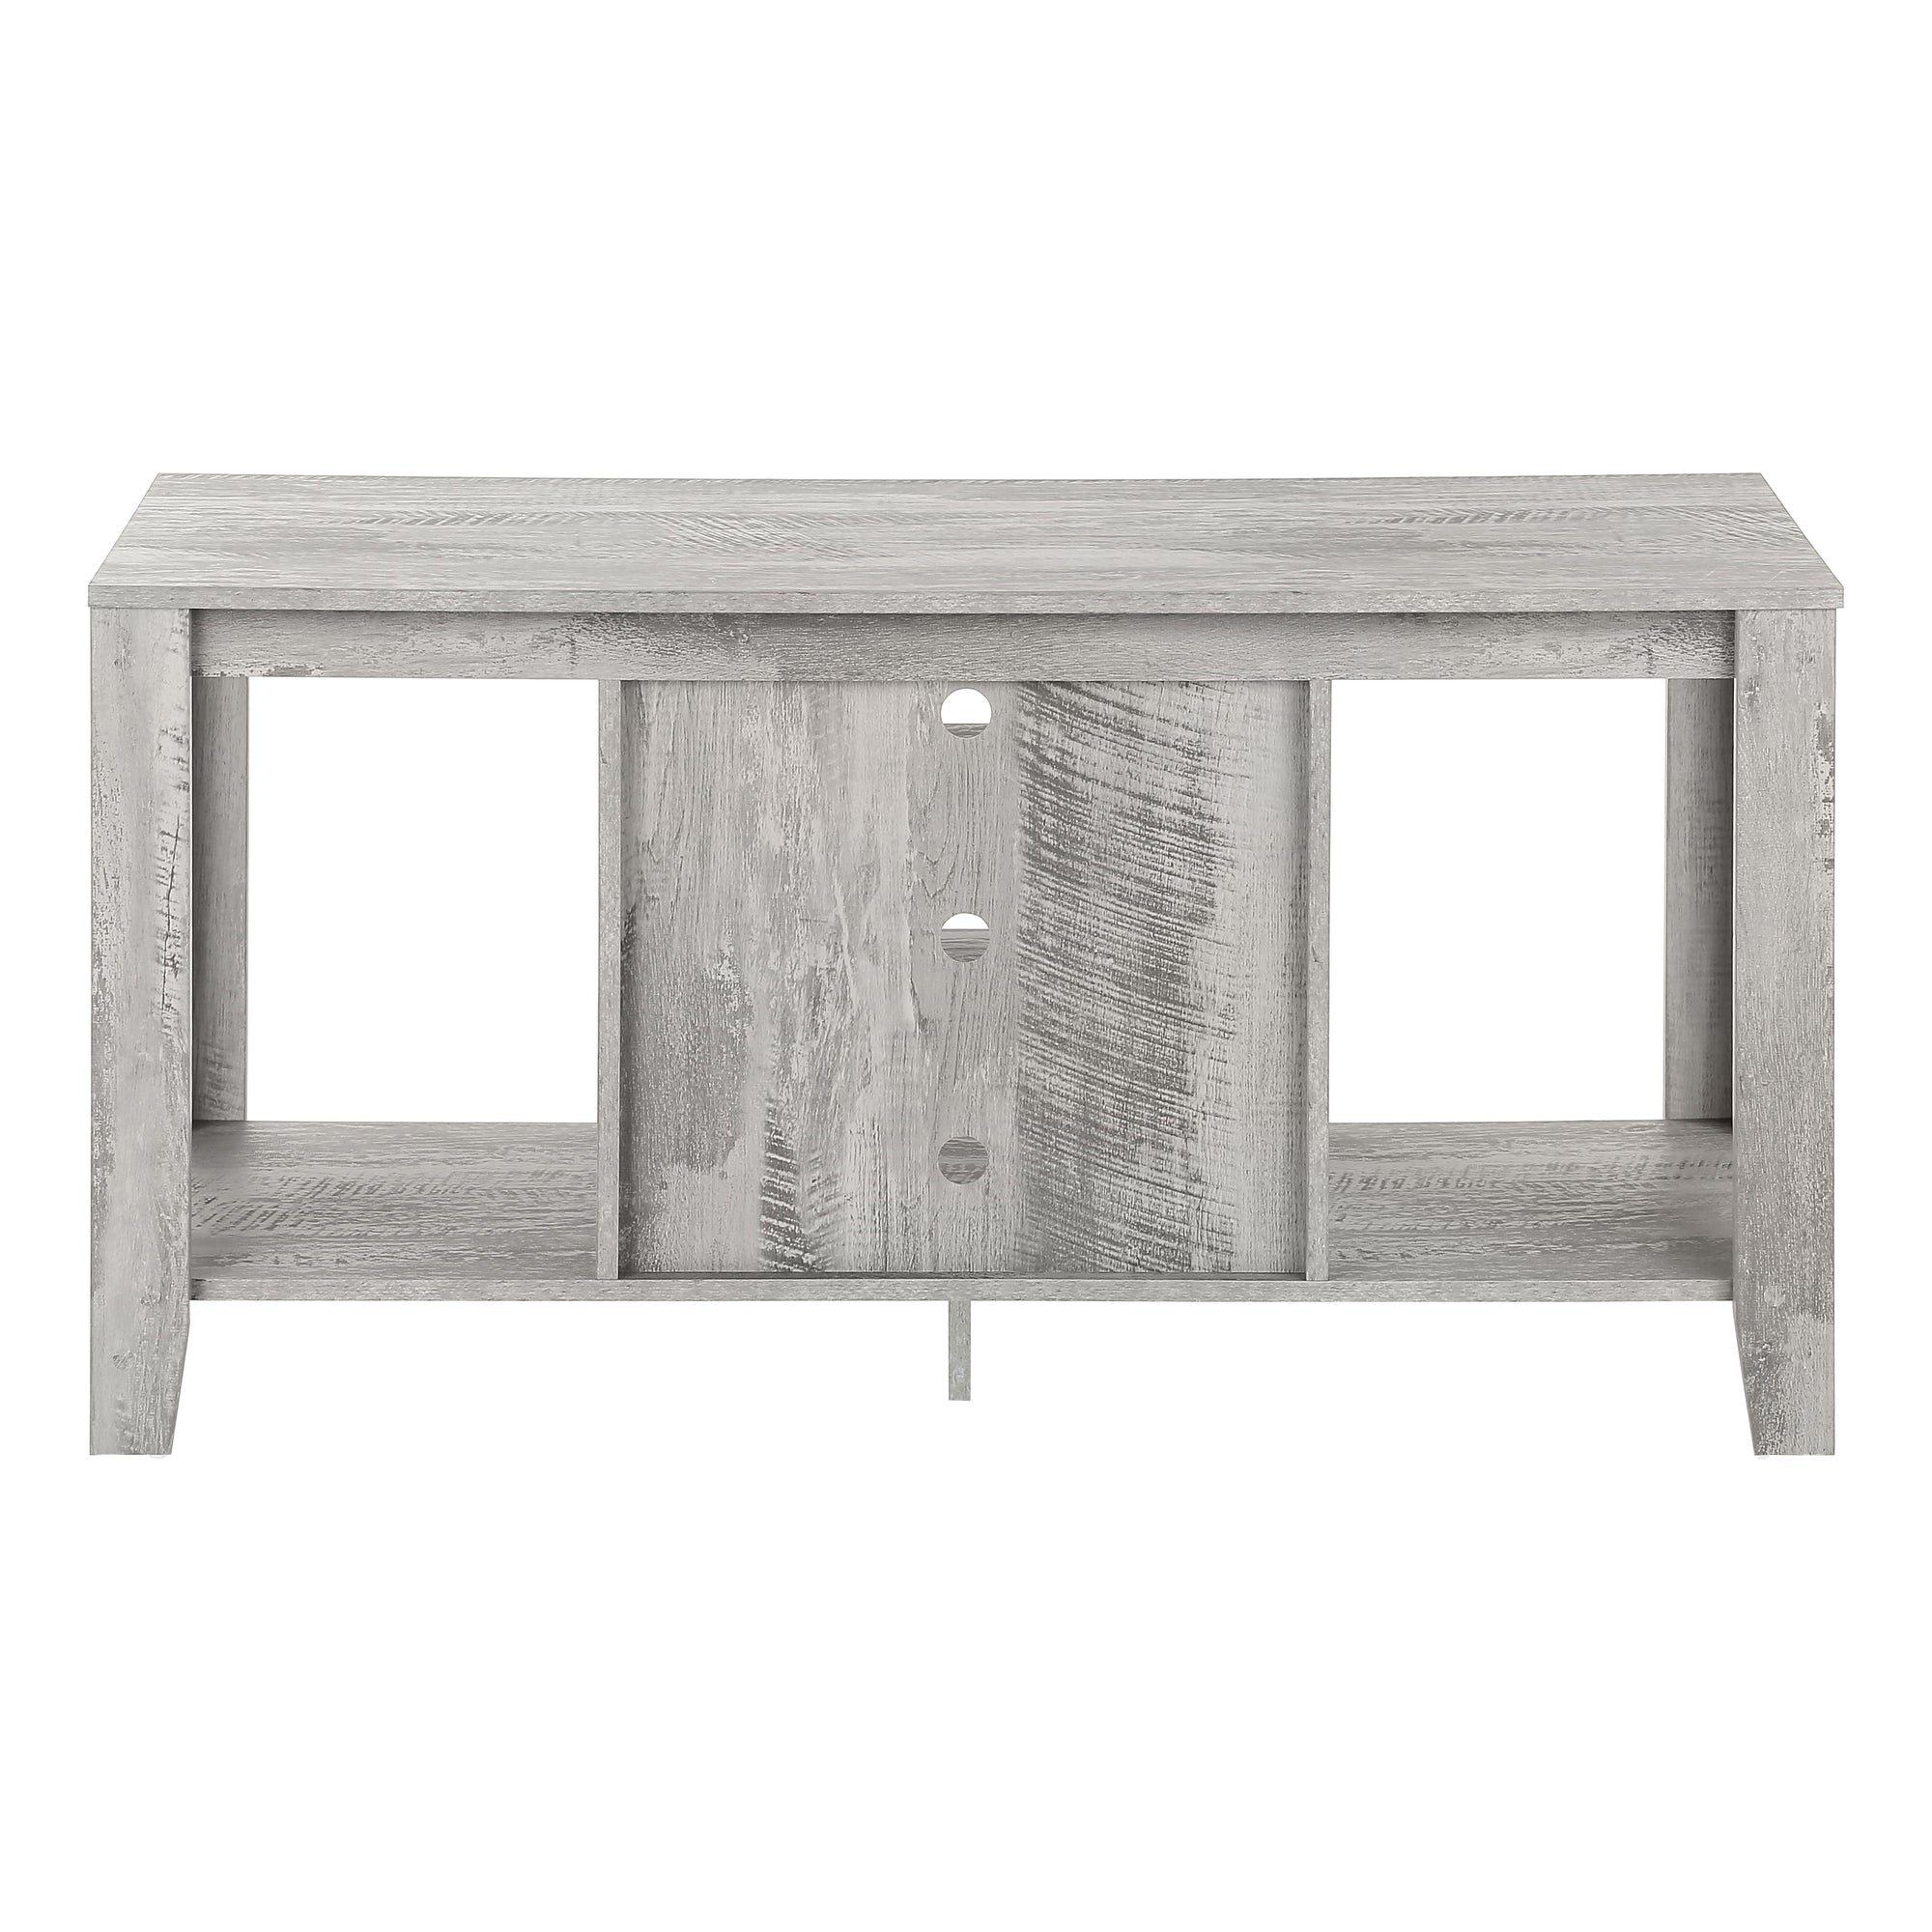 MN-333564    Tv Stand, 48 Inch, Console, Media Entertainment Center, Storage Cabinet, Living Room, Bedroom, Laminate, Industrial Grey, Contemporary, Modern